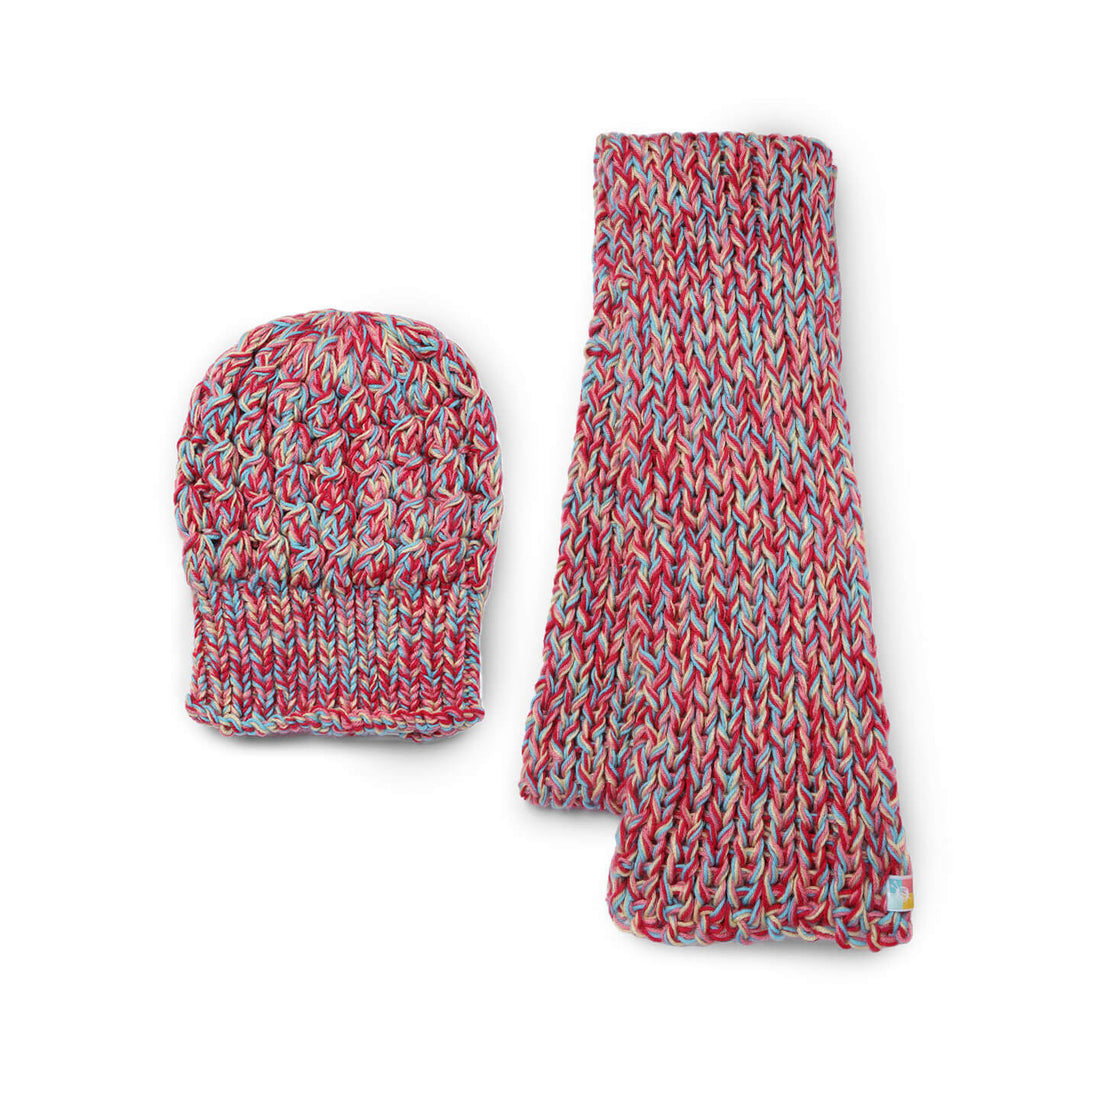 Beanie and Scarf Coordinating Set - 3179